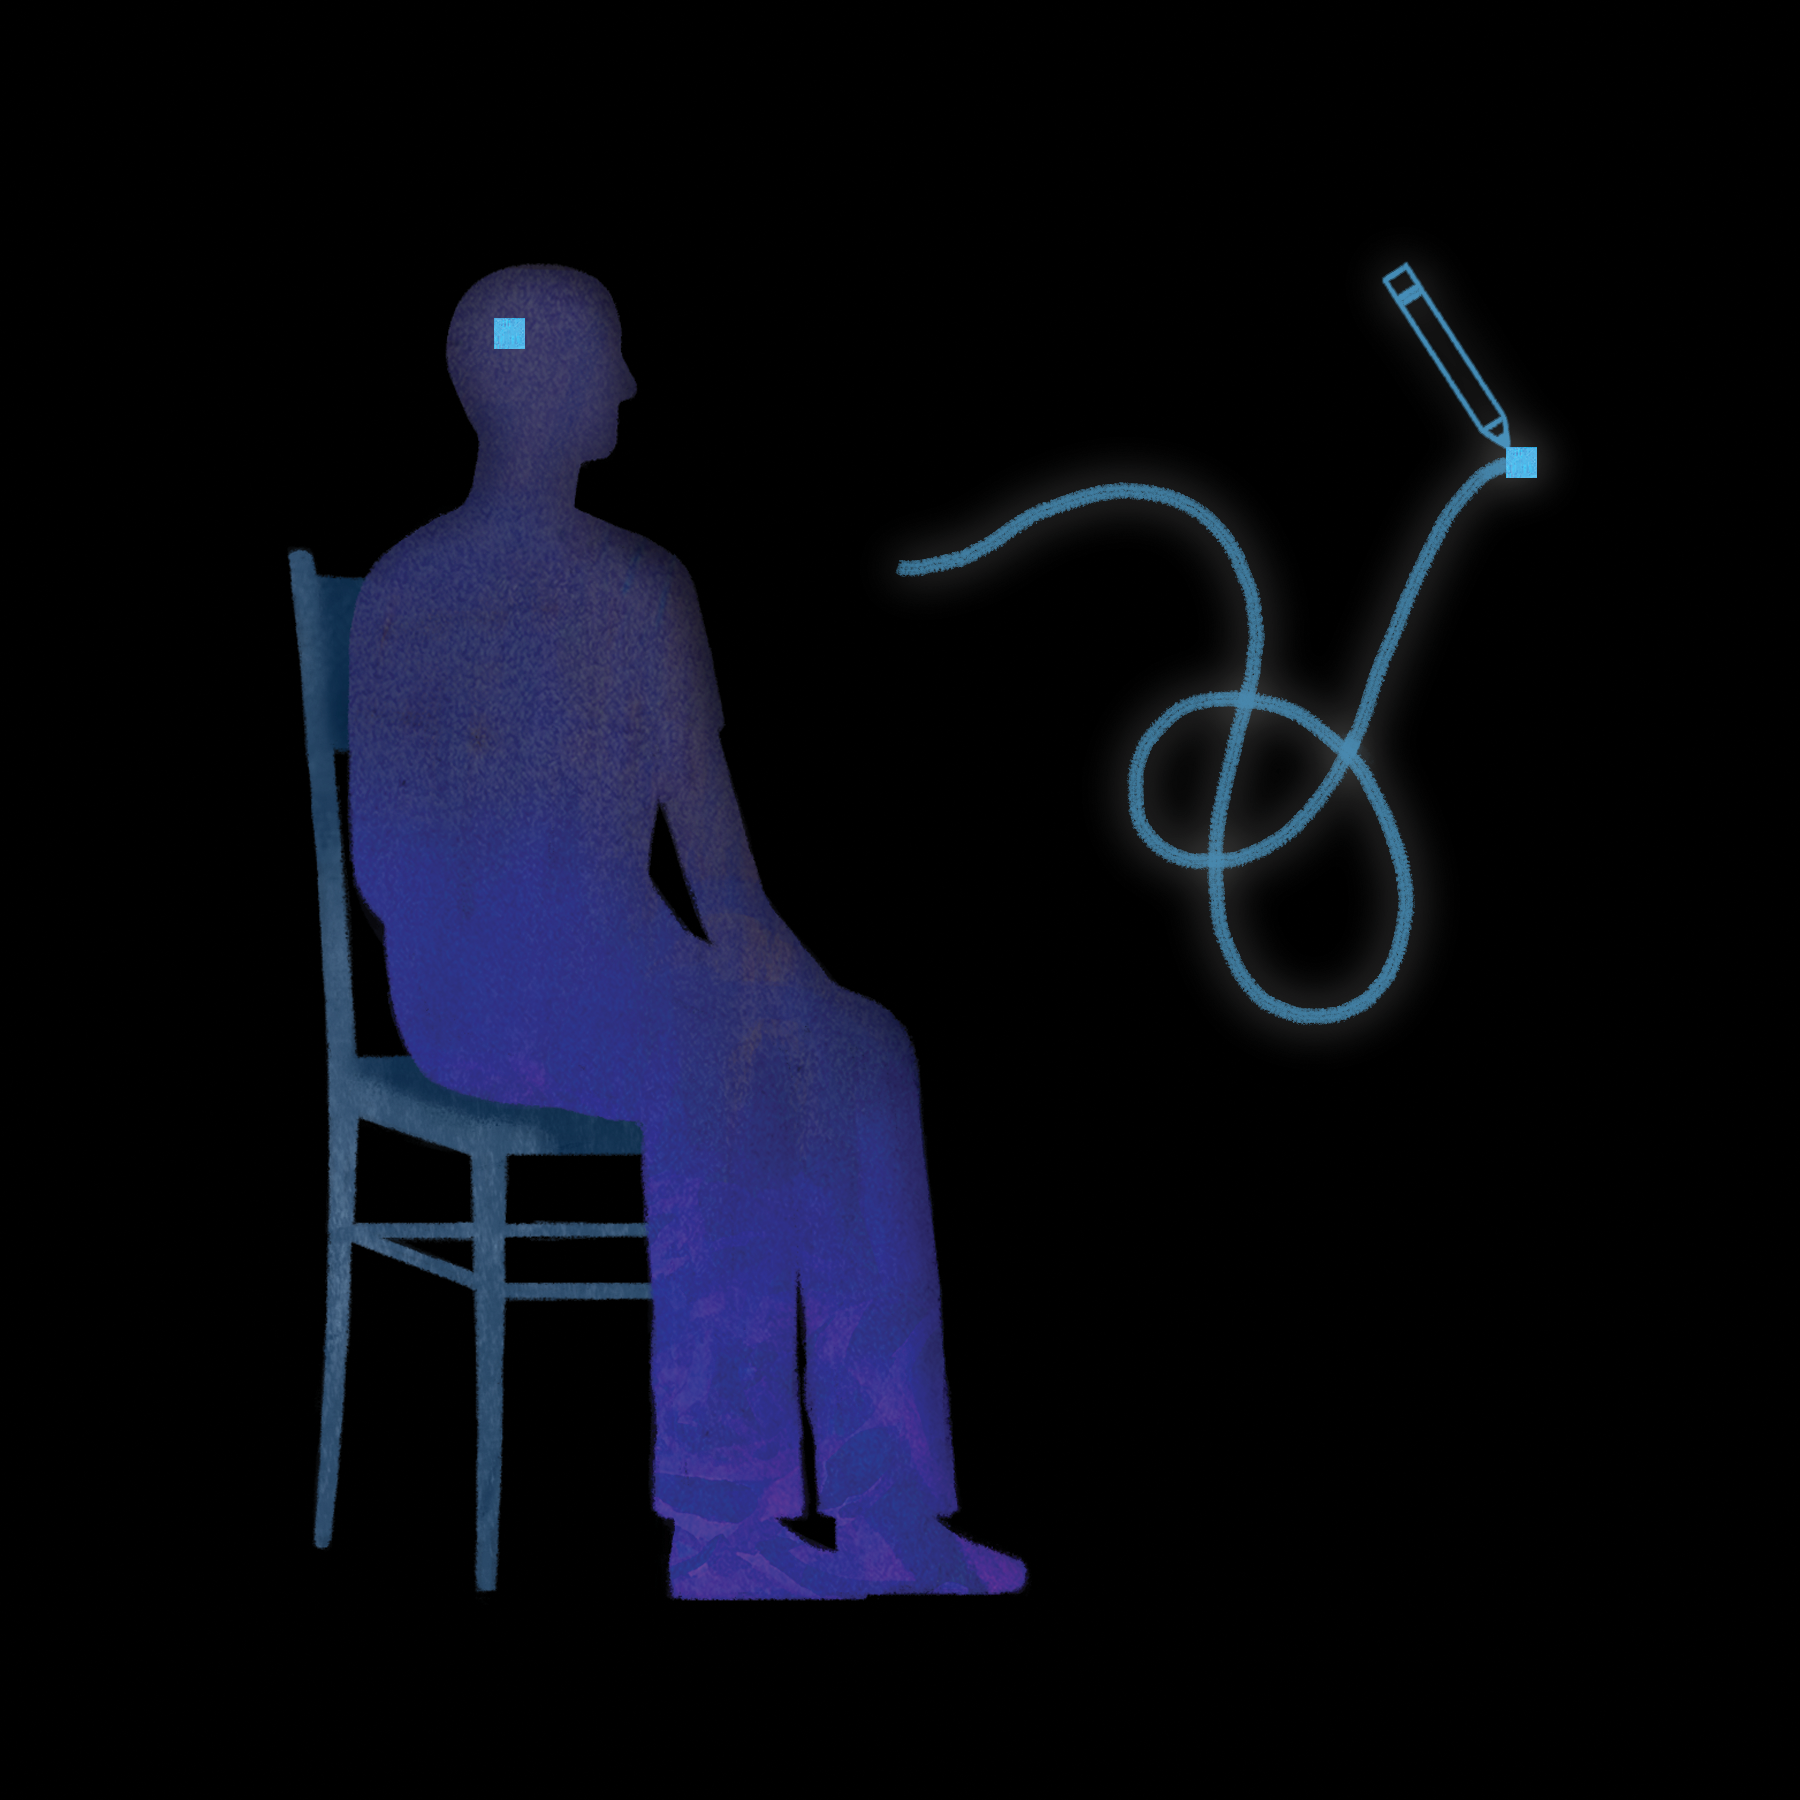 Illustration of Man Sitting in Chair with wire doodle next to him.